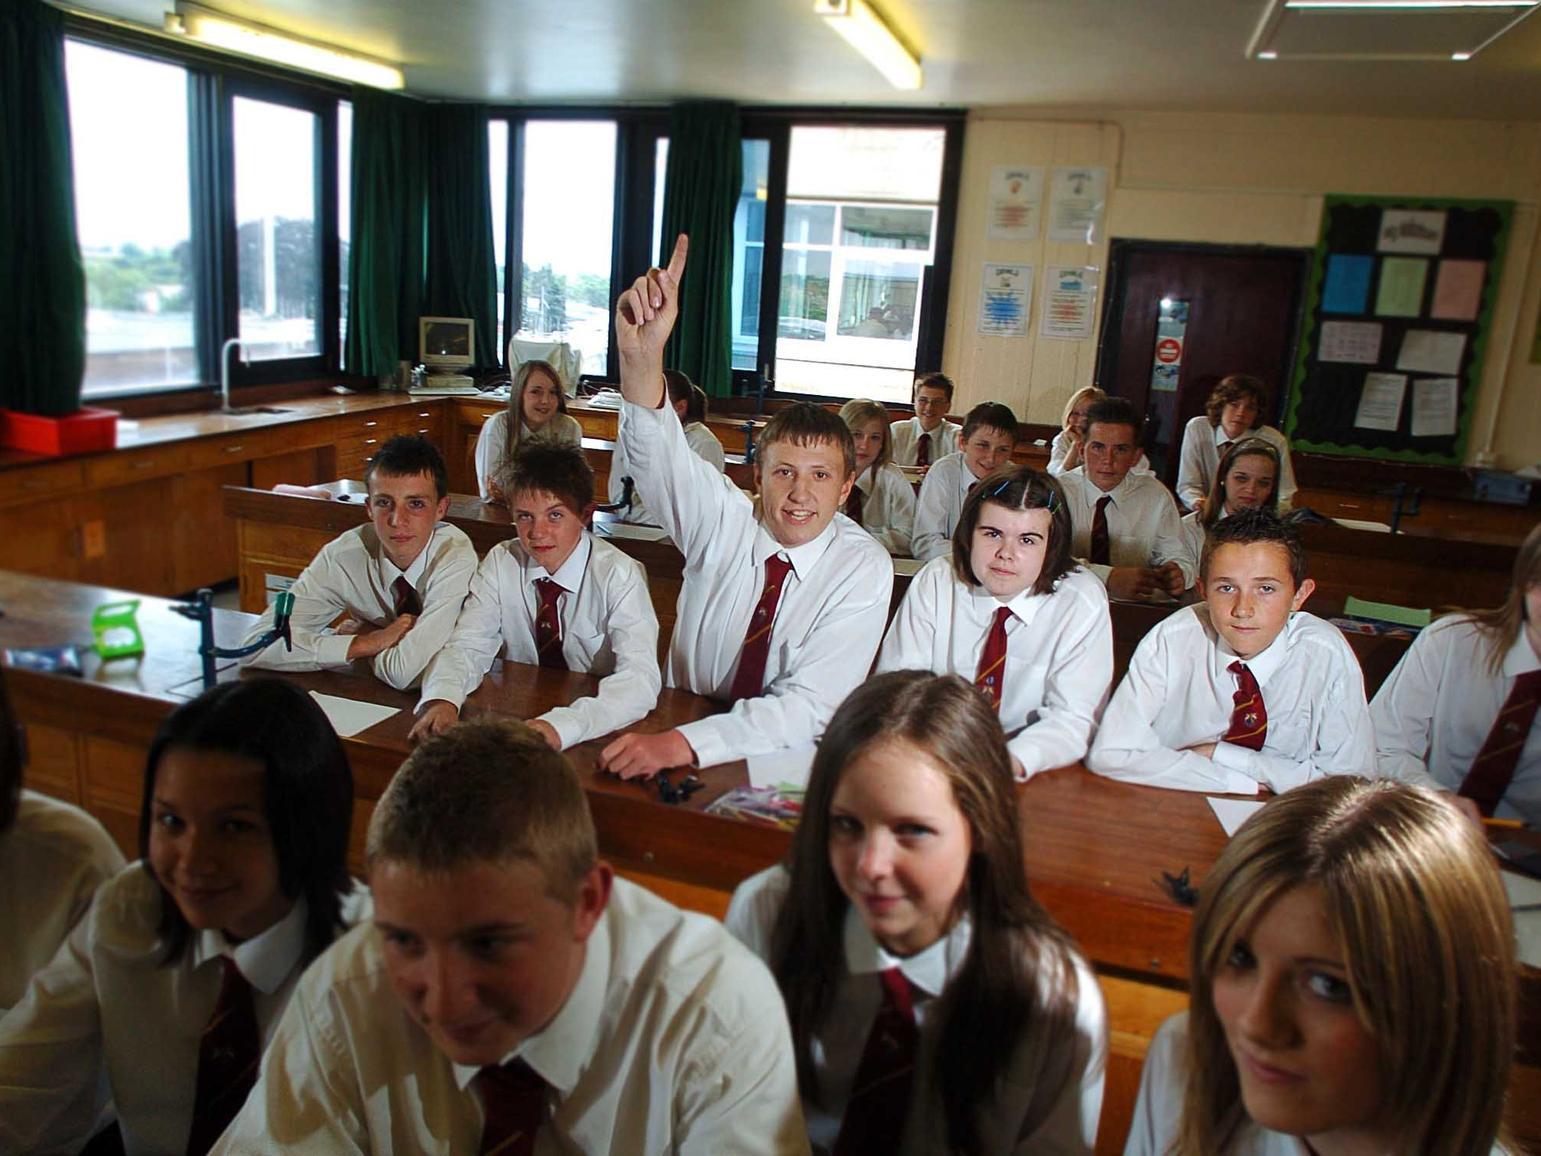 Garforth Community College received an excellent Ofsted report. Pictured (centre) Ben Taylor 14 enjoys the science class.